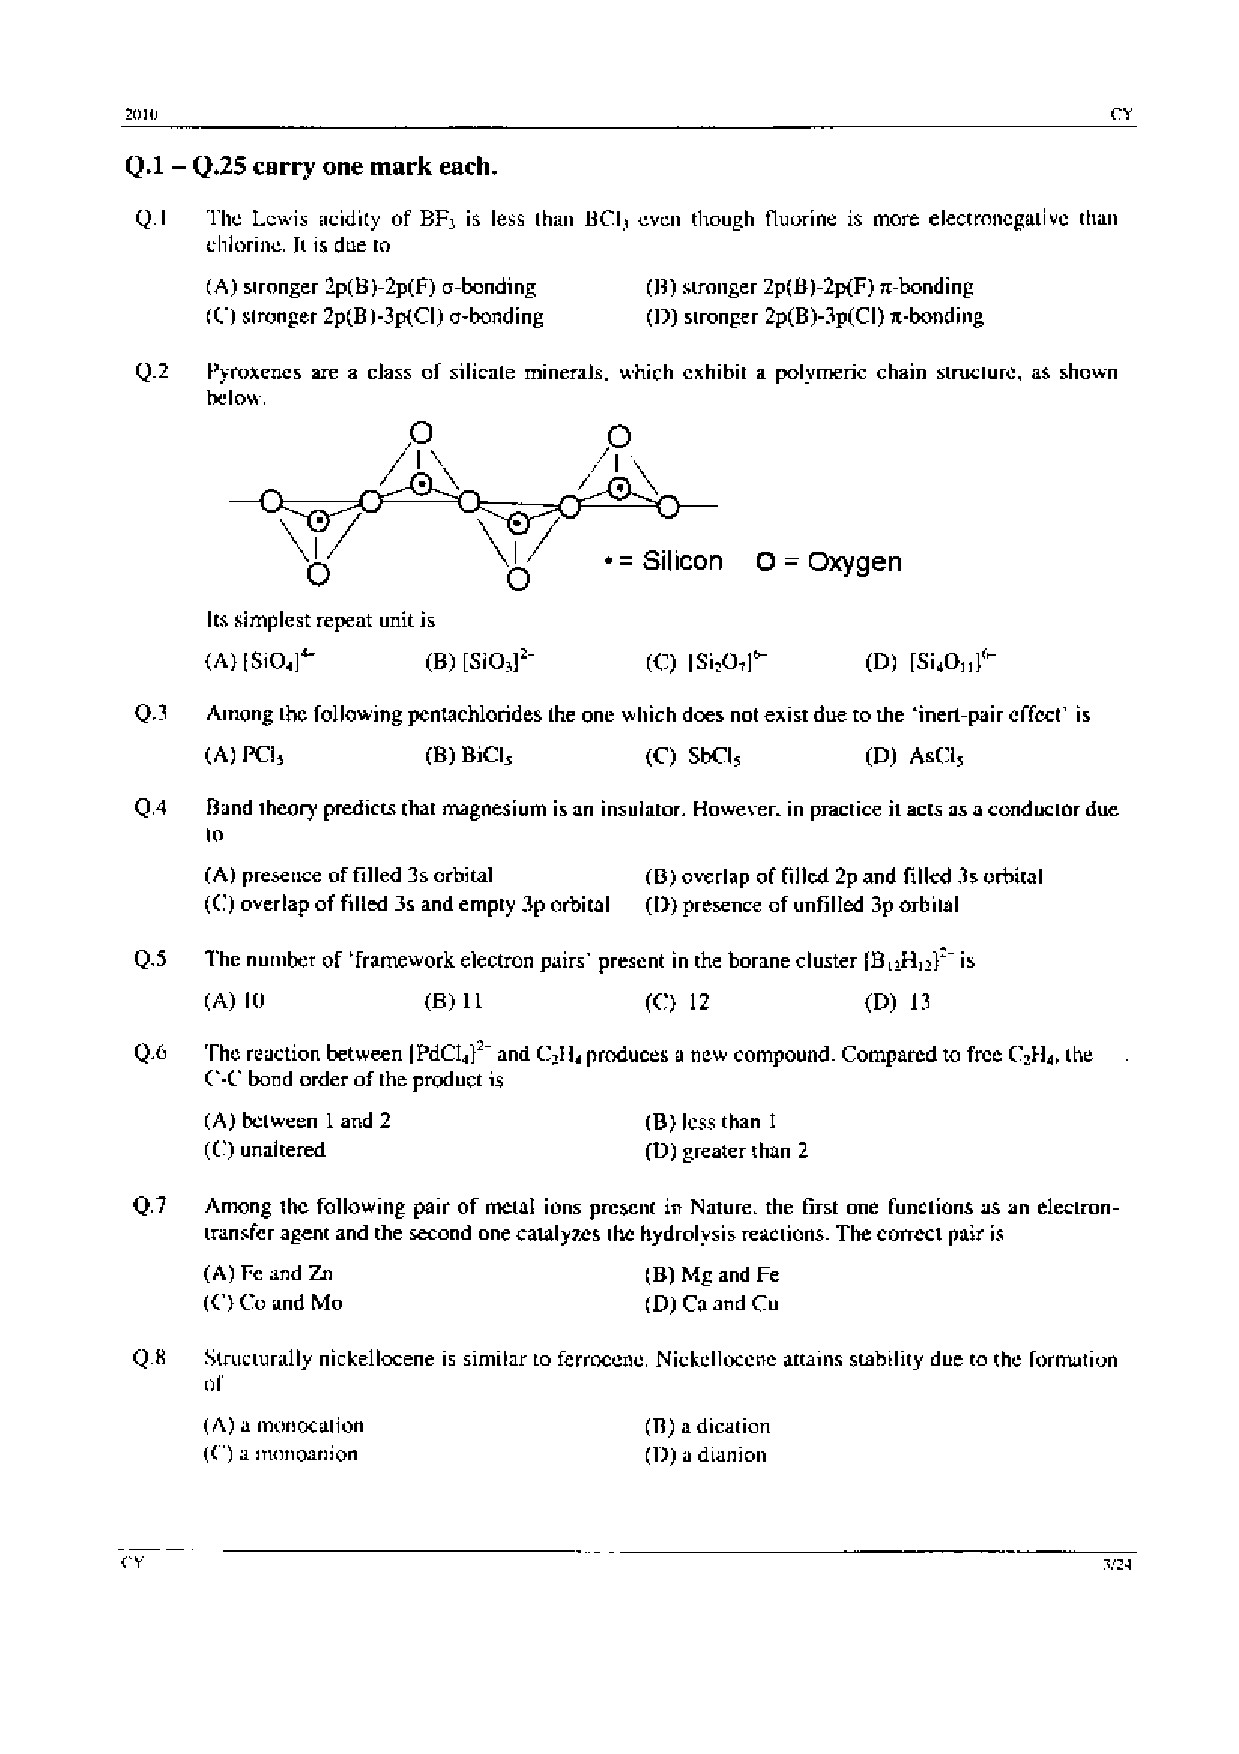 GATE Exam Question Paper 2010 Chemistry 3